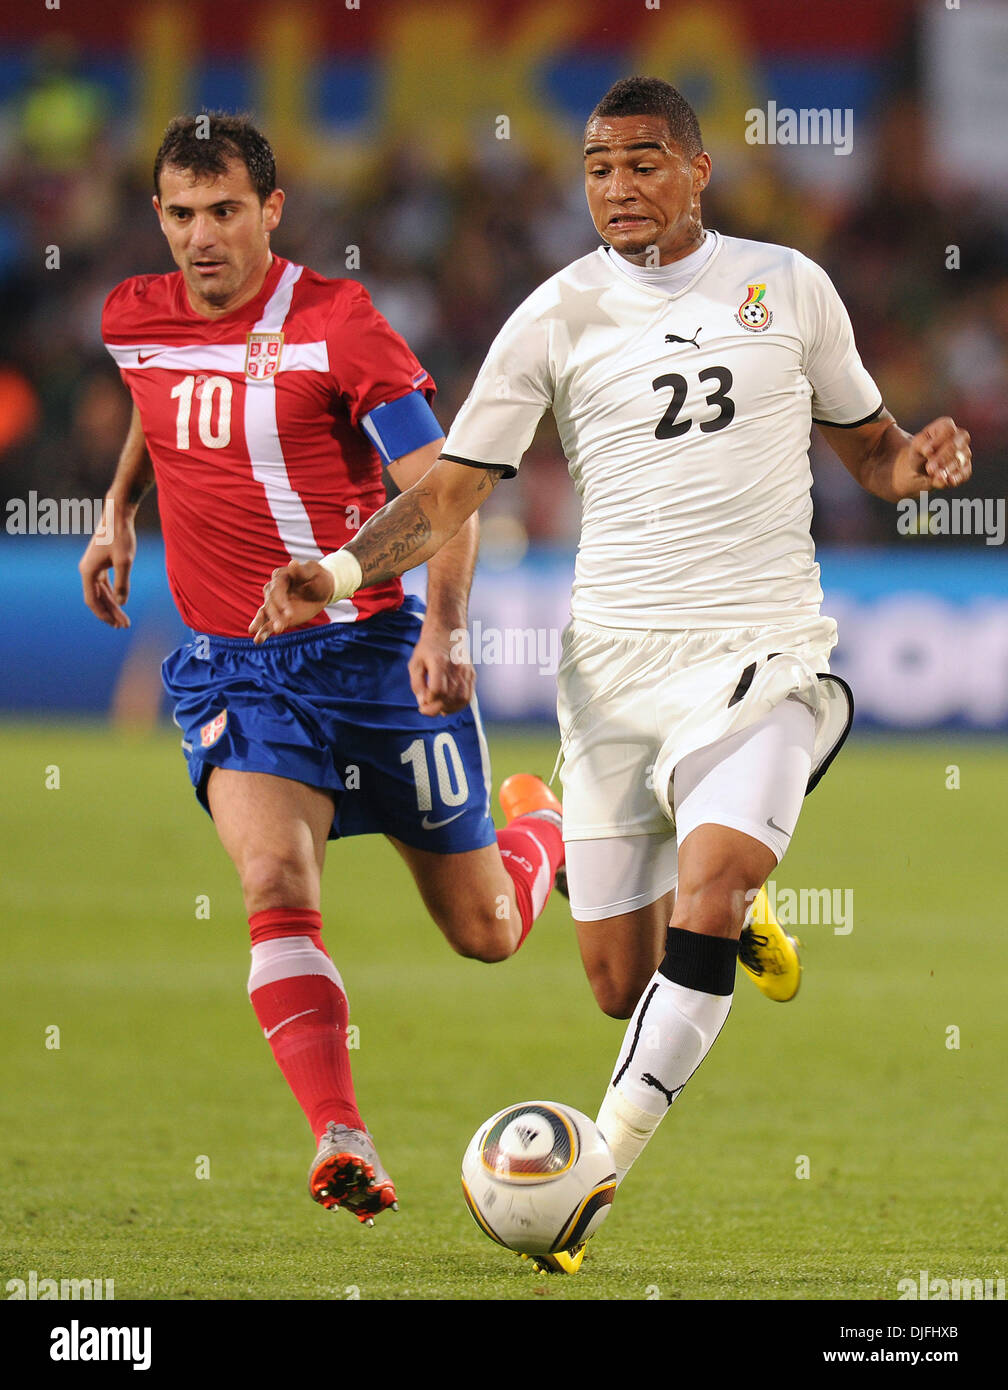 Jun 13, 2010 - Pretoria, South Africa - KEVIN PRINCE BOATENG of Ghana fights for the ball with DEJAN STANKOVIC of Serbia during a FIFA World Cup 2010 football match between Serbia and Ghana at the Loftus Versfeld Stadium, on June 13, 2010 in Pretoria, South Africa. (Credit Image: © Luca Ghidoni/ZUMApress.com) Stock Photo